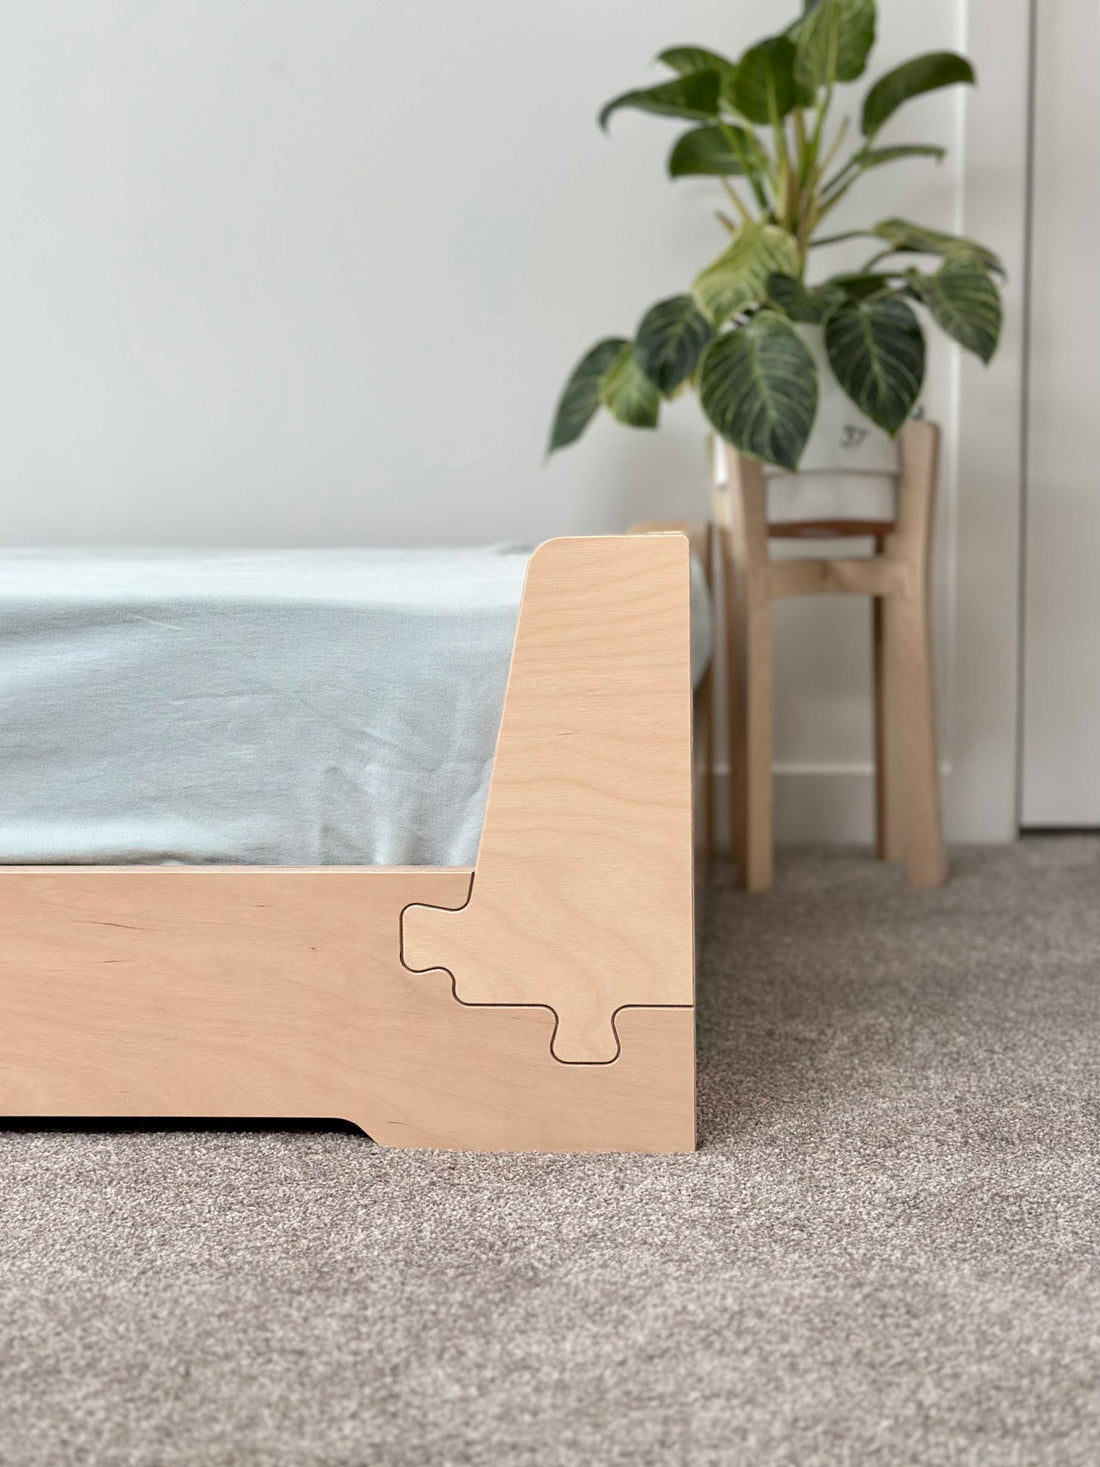 Plywood floor bed: moisture-resistant, child-safe design, perfect for mold-free sleep in AU homes.